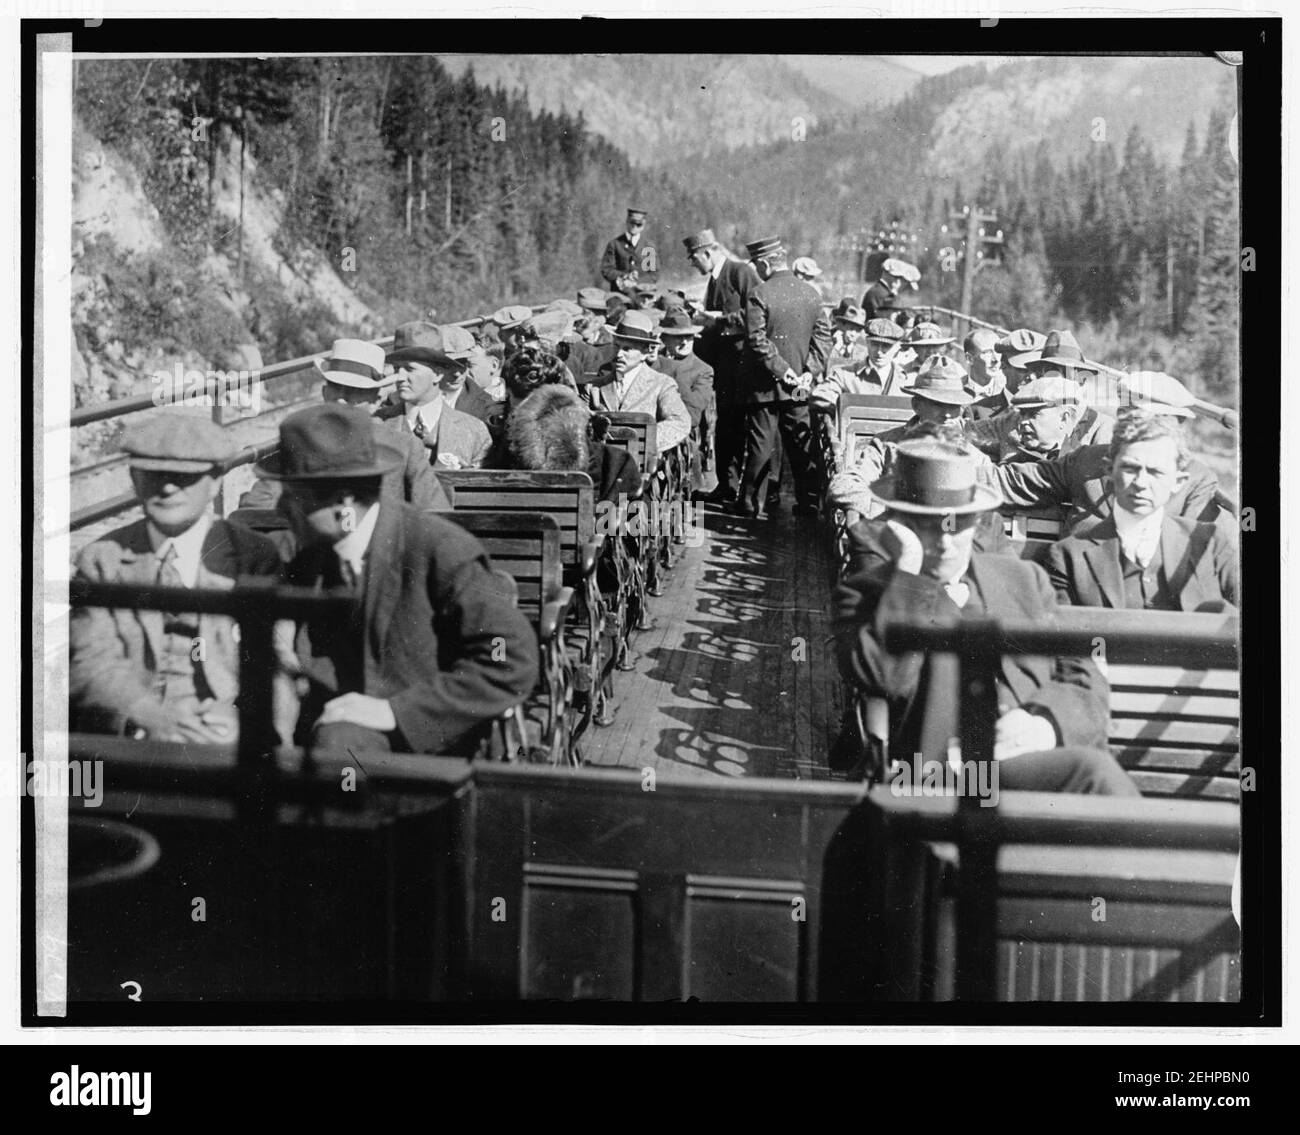 Passengers on roof deck of train traveling through mountains Stock Photo